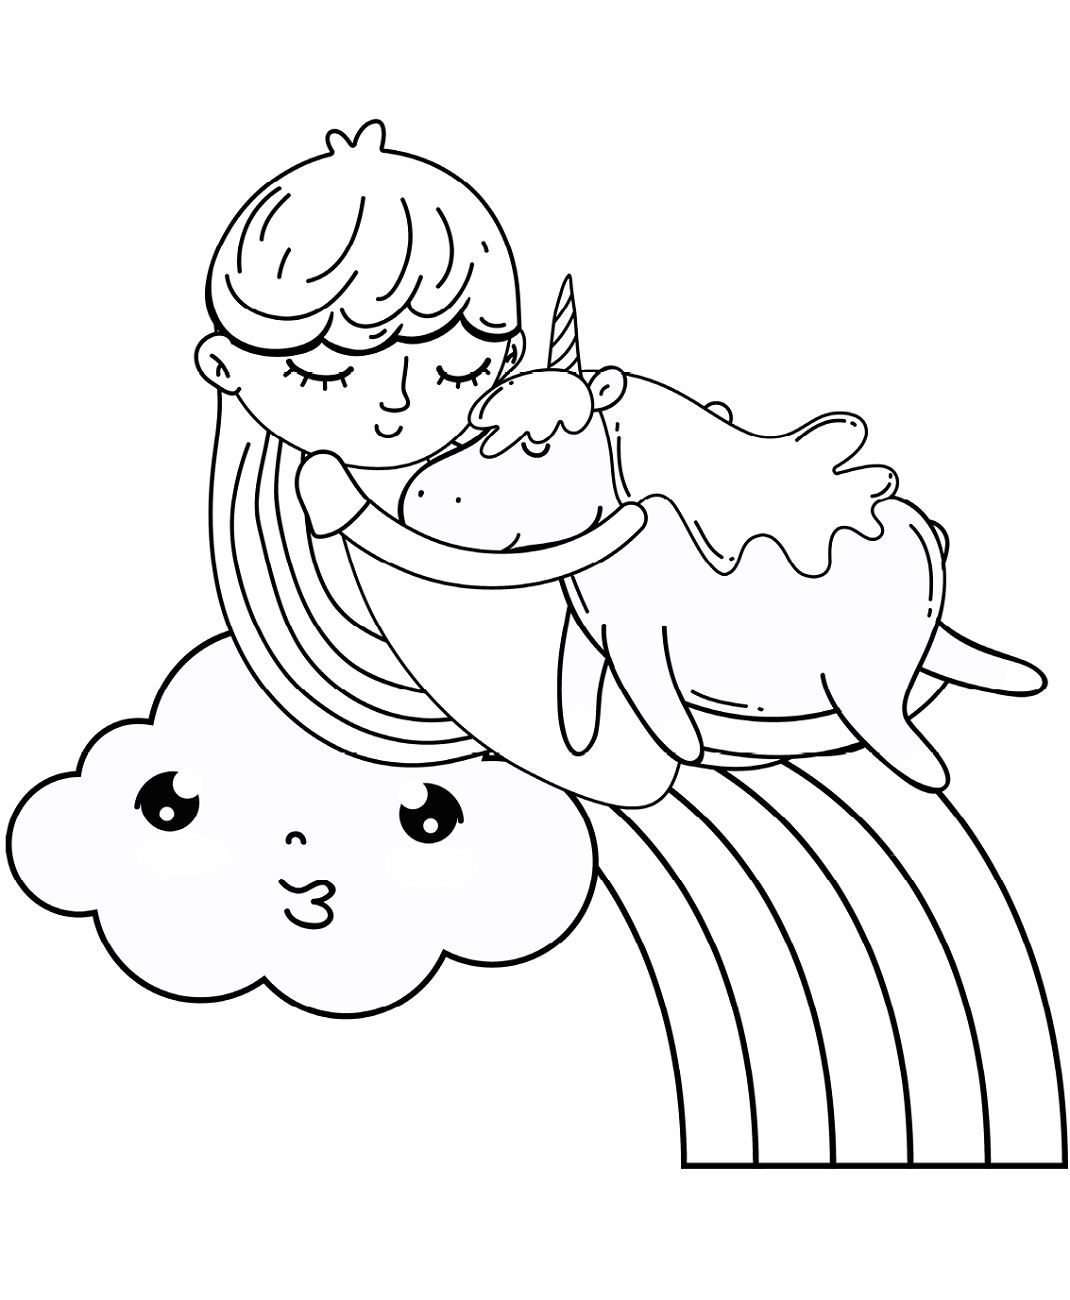 Girl Sleeping With Unicorn Coloring Page Free Printable Coloring